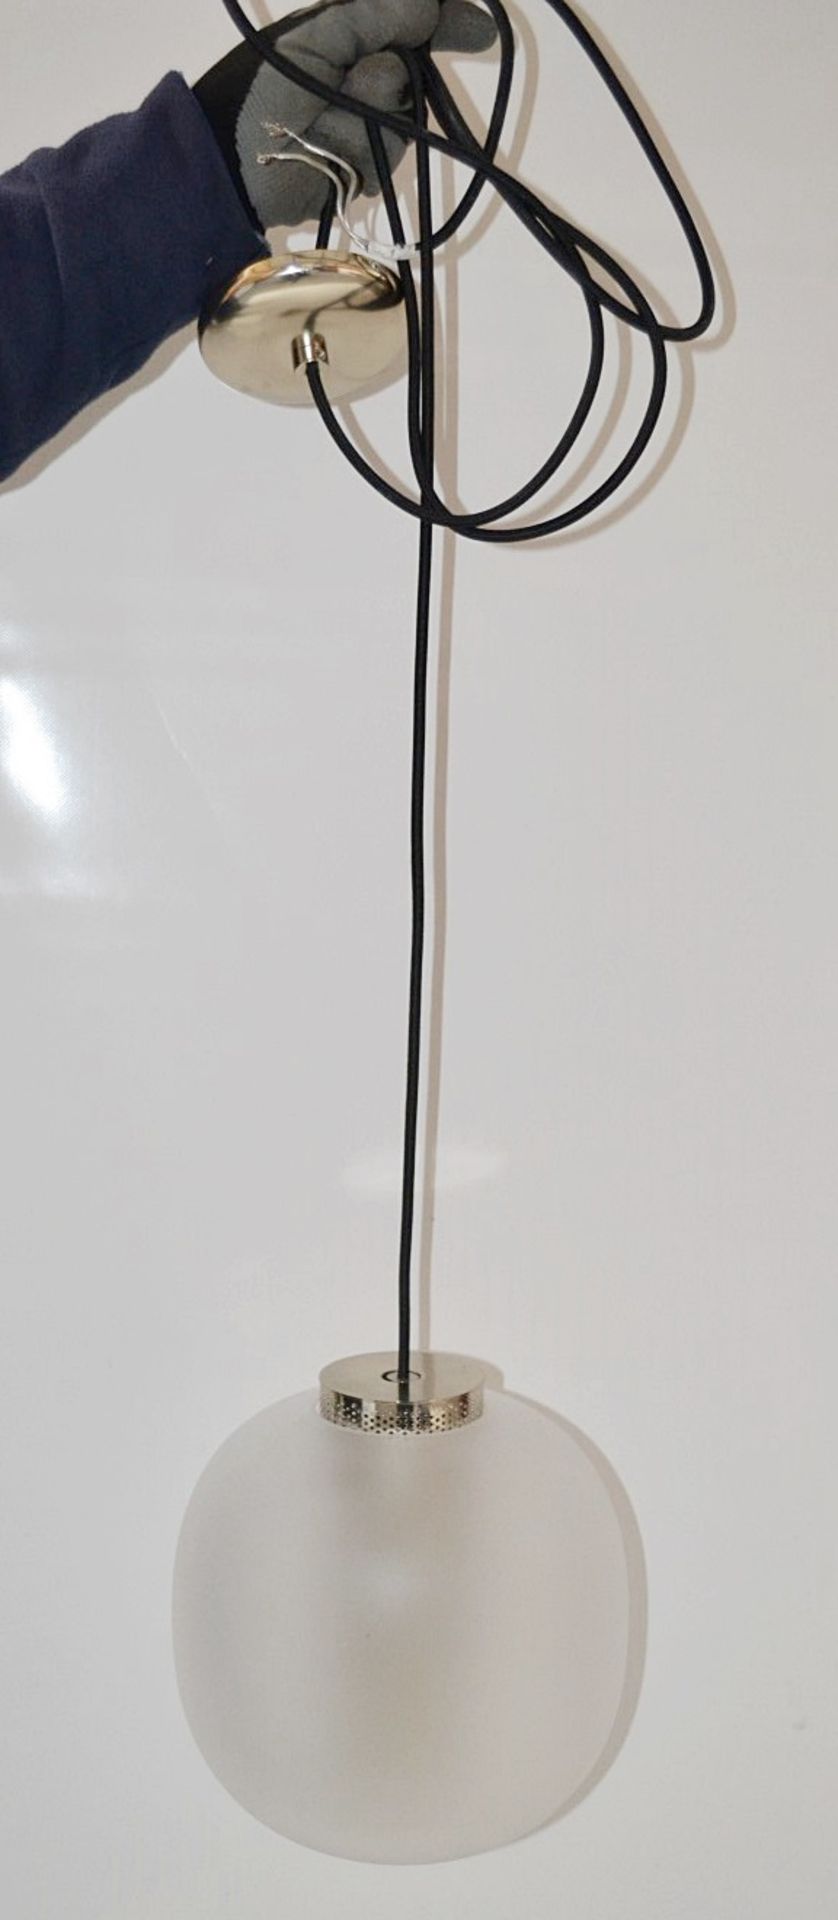 1 x 'Bloom' Pendant Light By Resident - Frosted White Glass - Original RRP £395.00 - Image 3 of 6